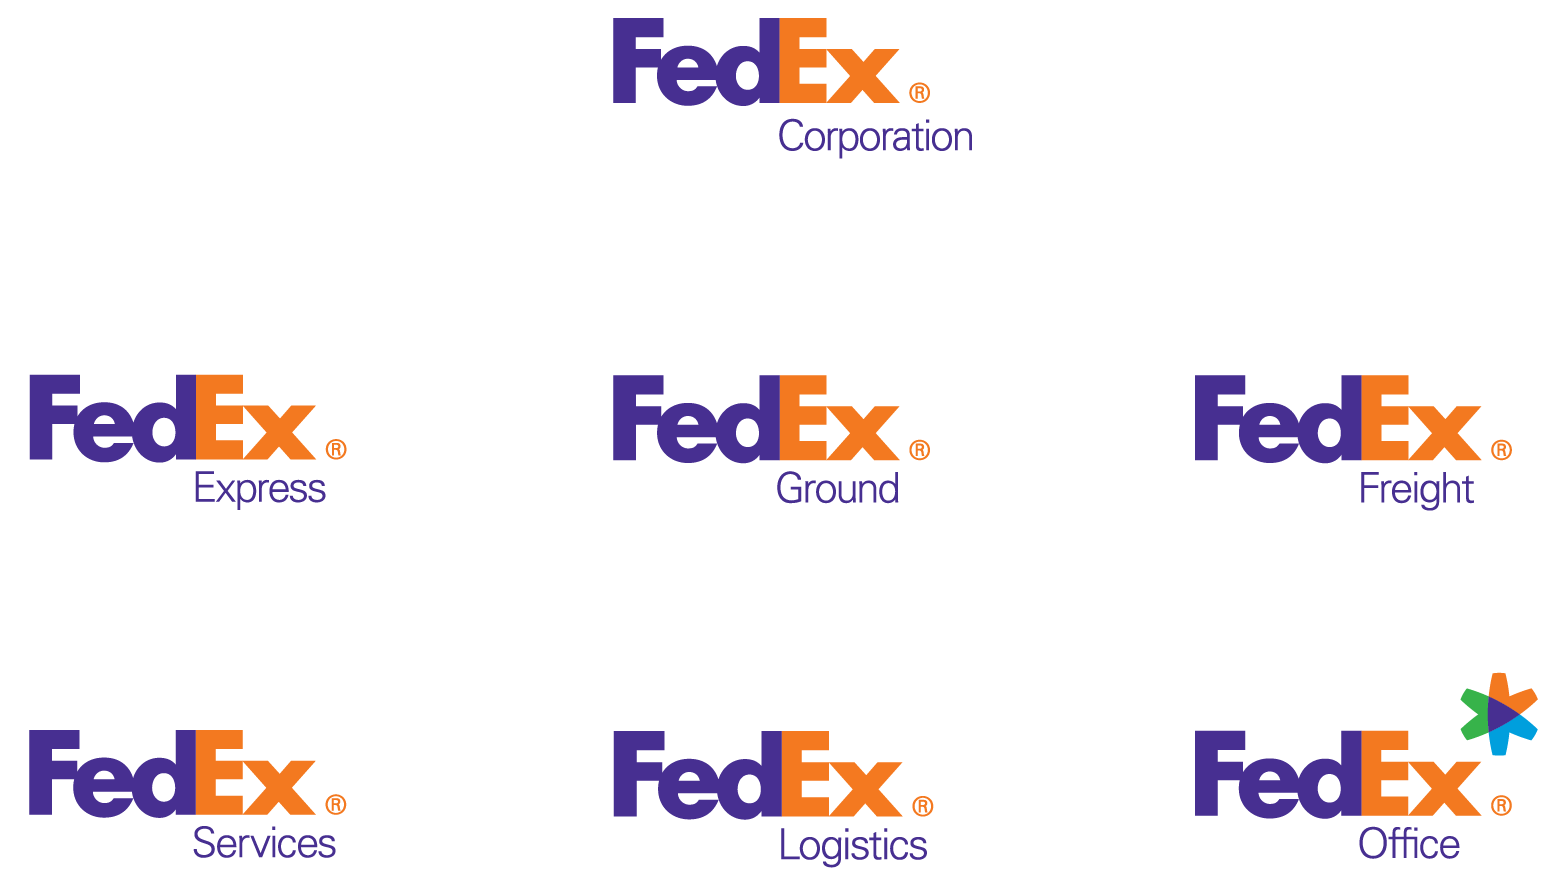 FedEx International Logo - Company Structure and Facts - About FedEx